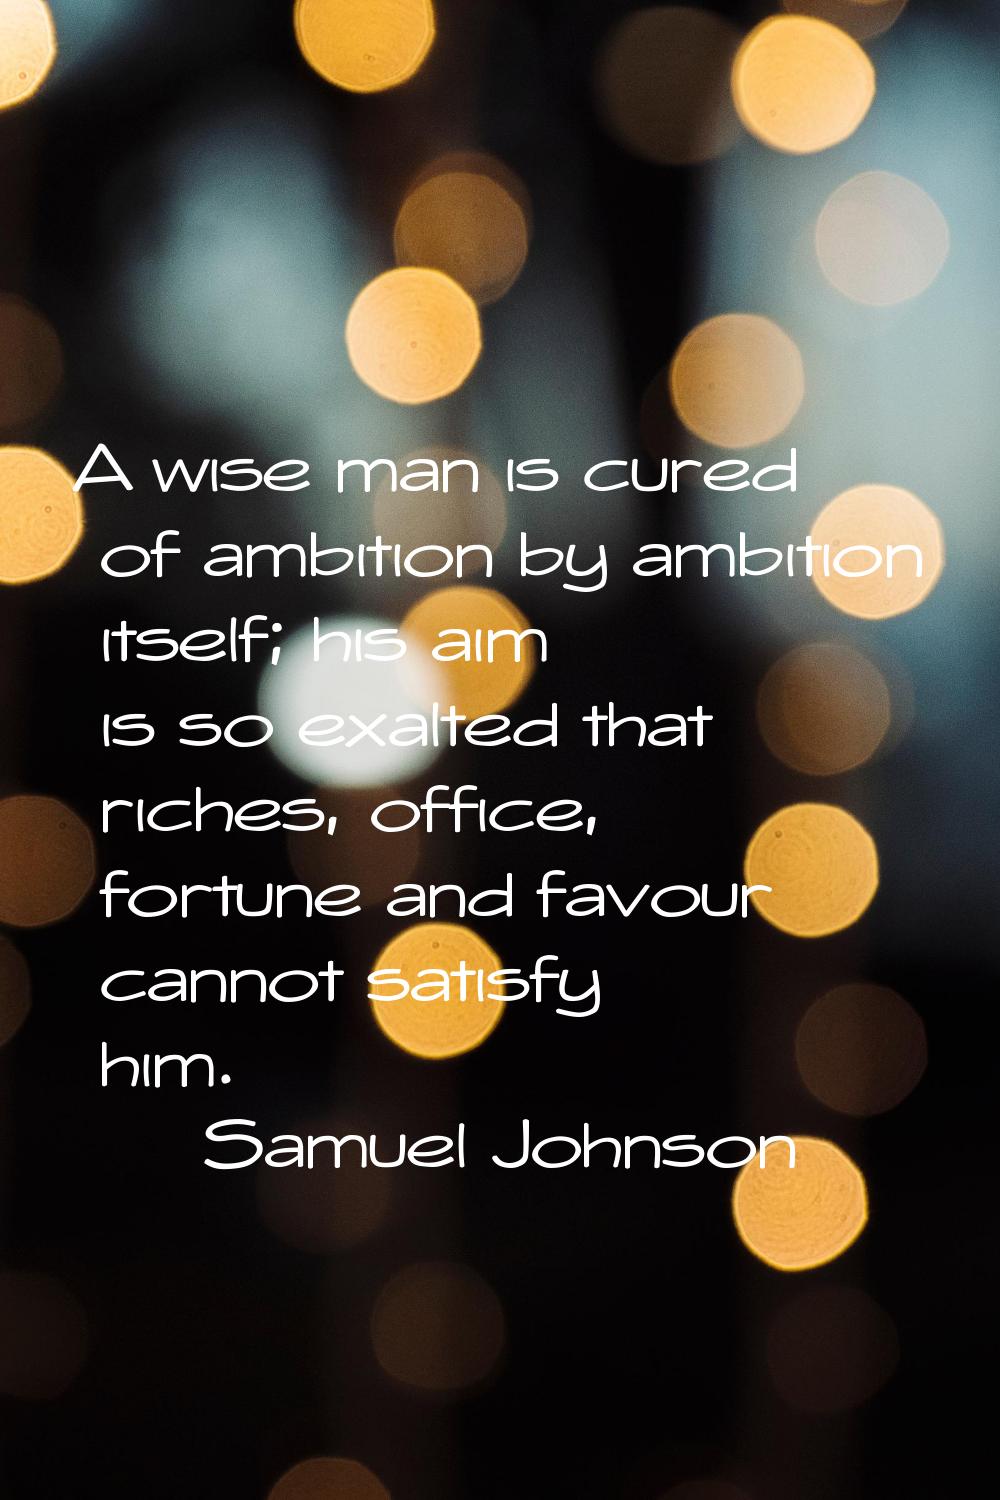 A wise man is cured of ambition by ambition itself; his aim is so exalted that riches, office, fort